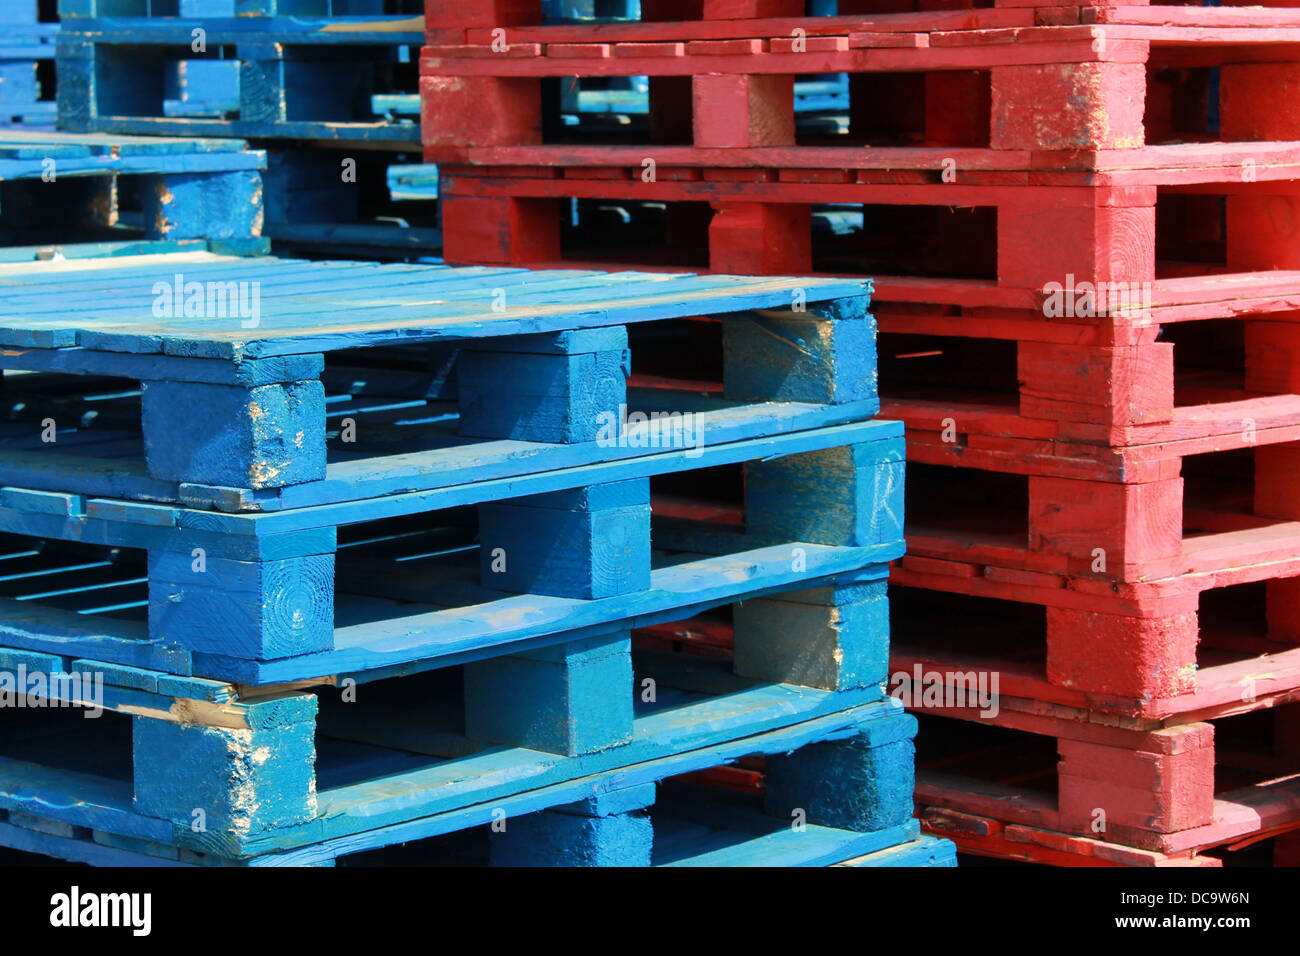 Colorful stacks of red and white crate pallets. Stock Photo